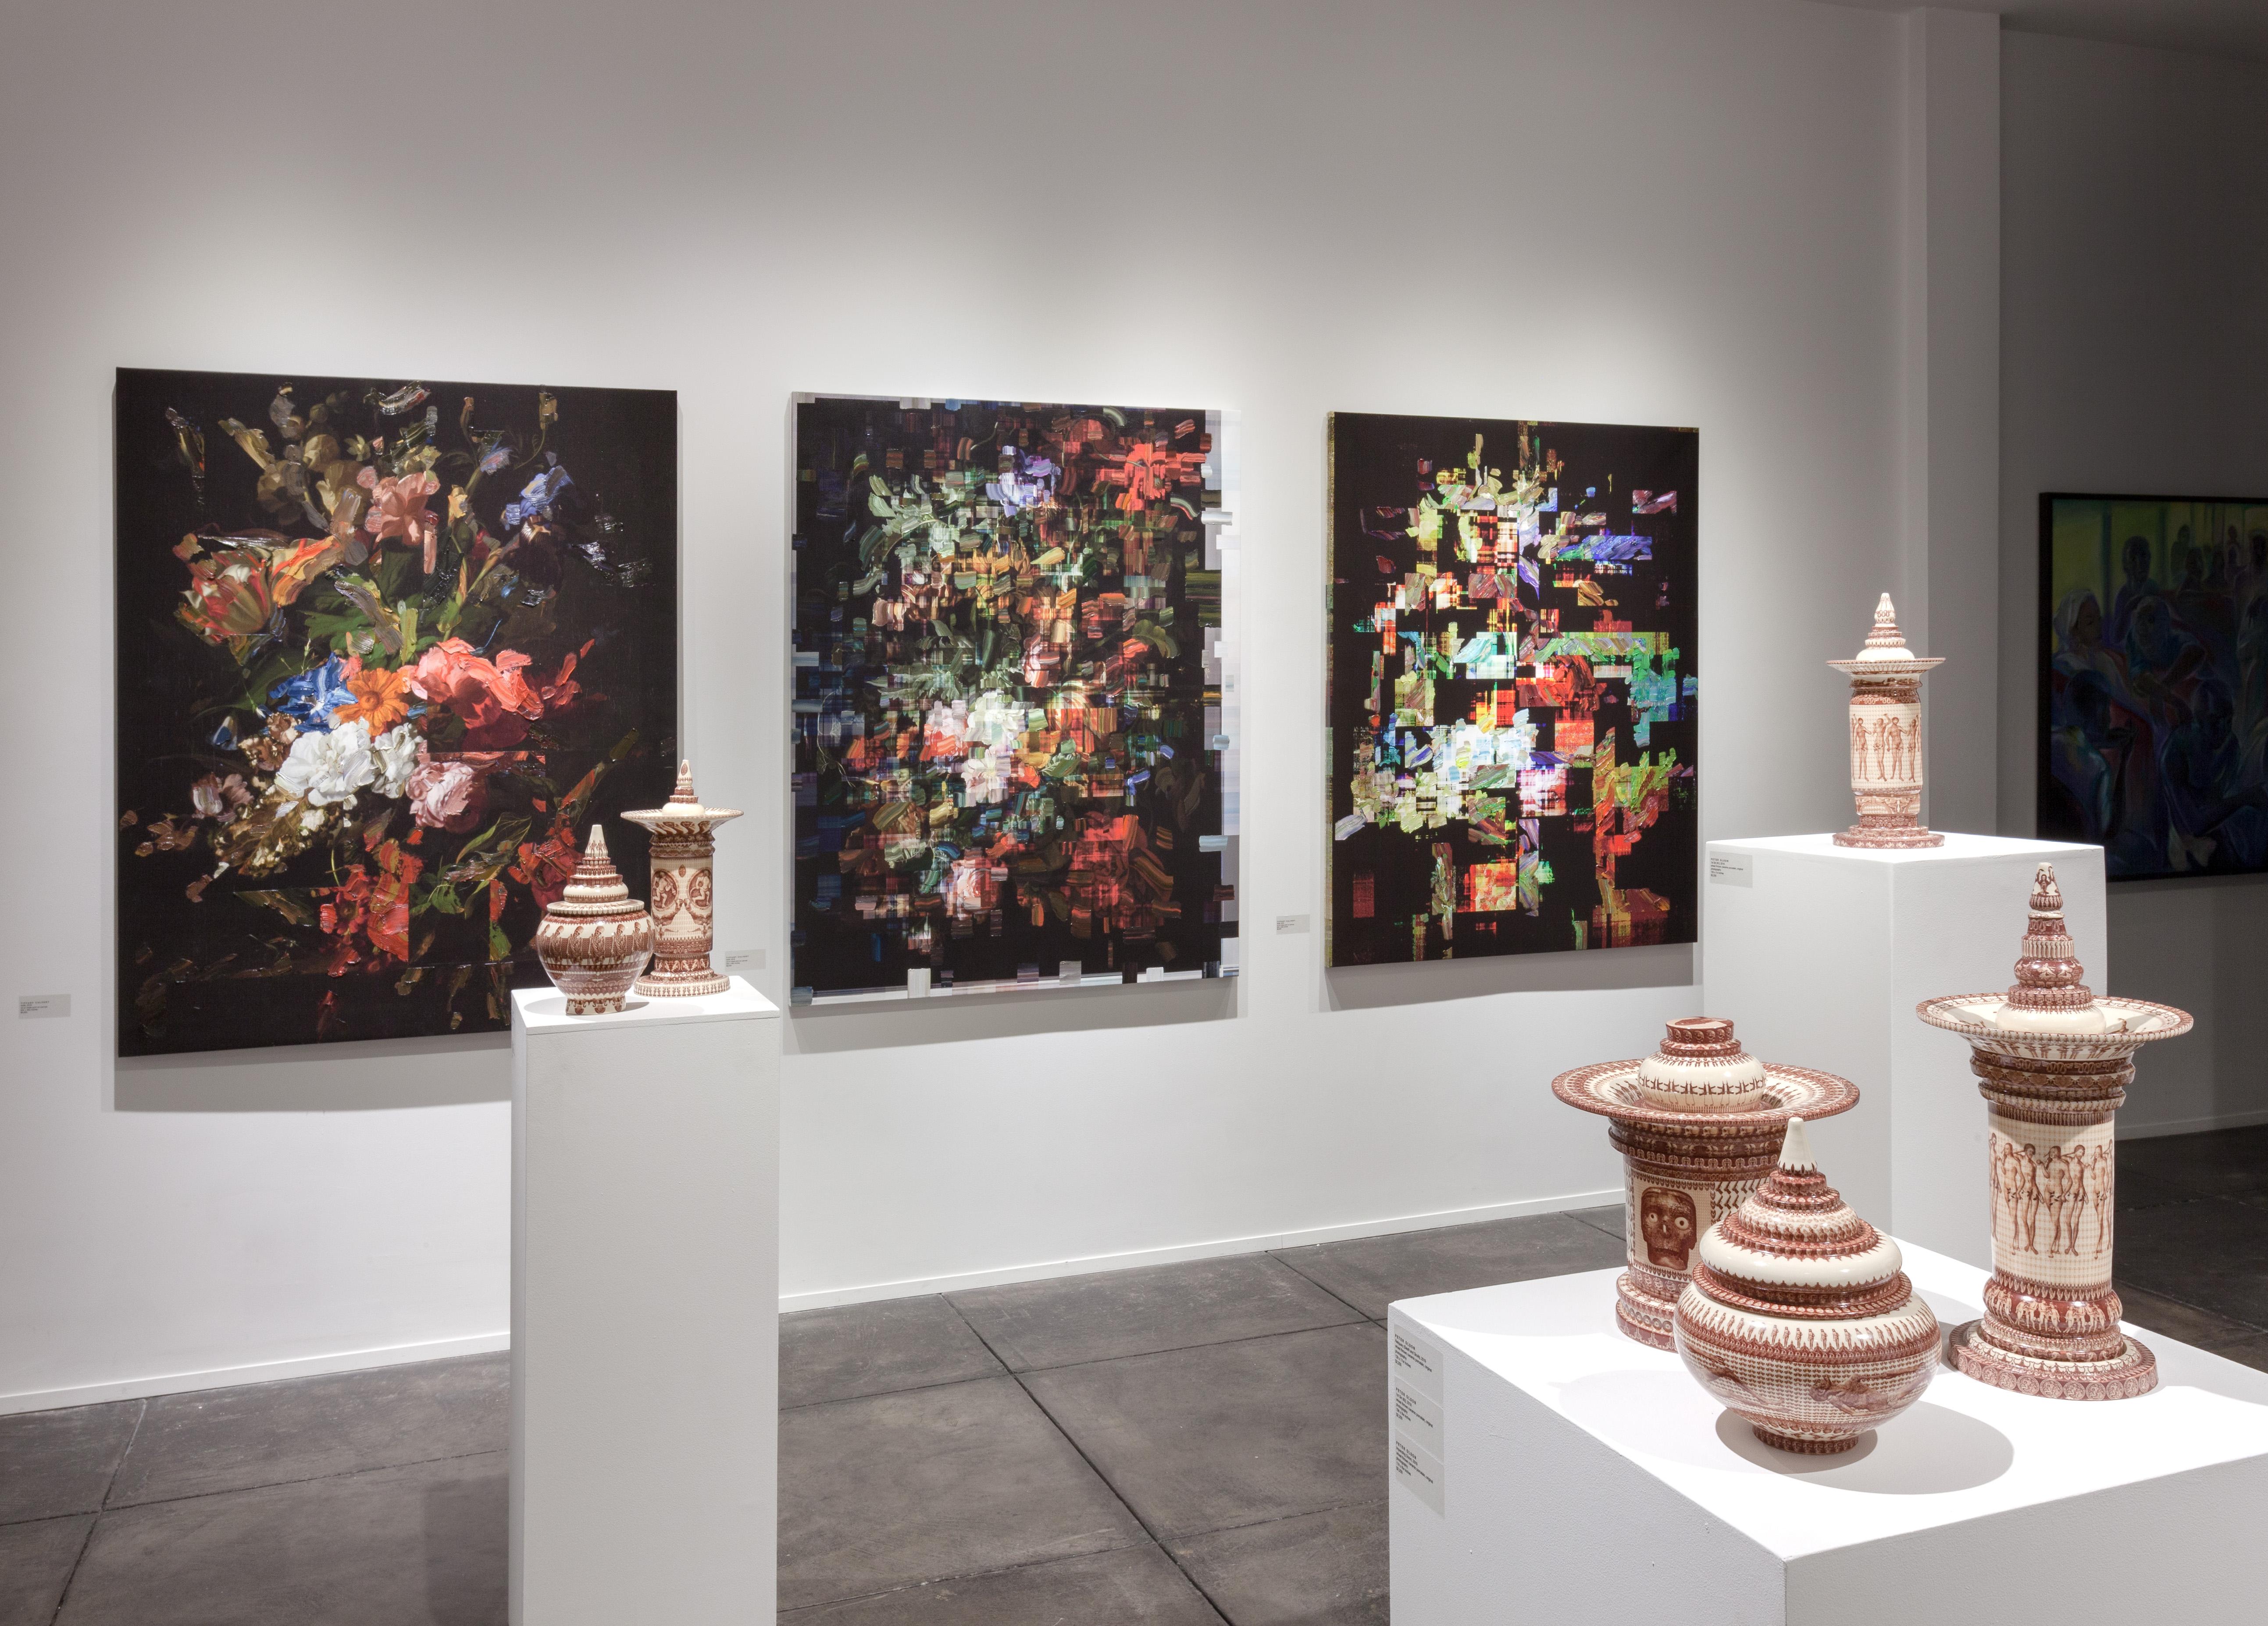 For the last six years, Peter Olson has harmonized photography and ceramics, two mediums that have forced their way into fine art. As bands of imagery spin around the thrown and assembled ceramic garnitures, there is a feeling that time is passing,